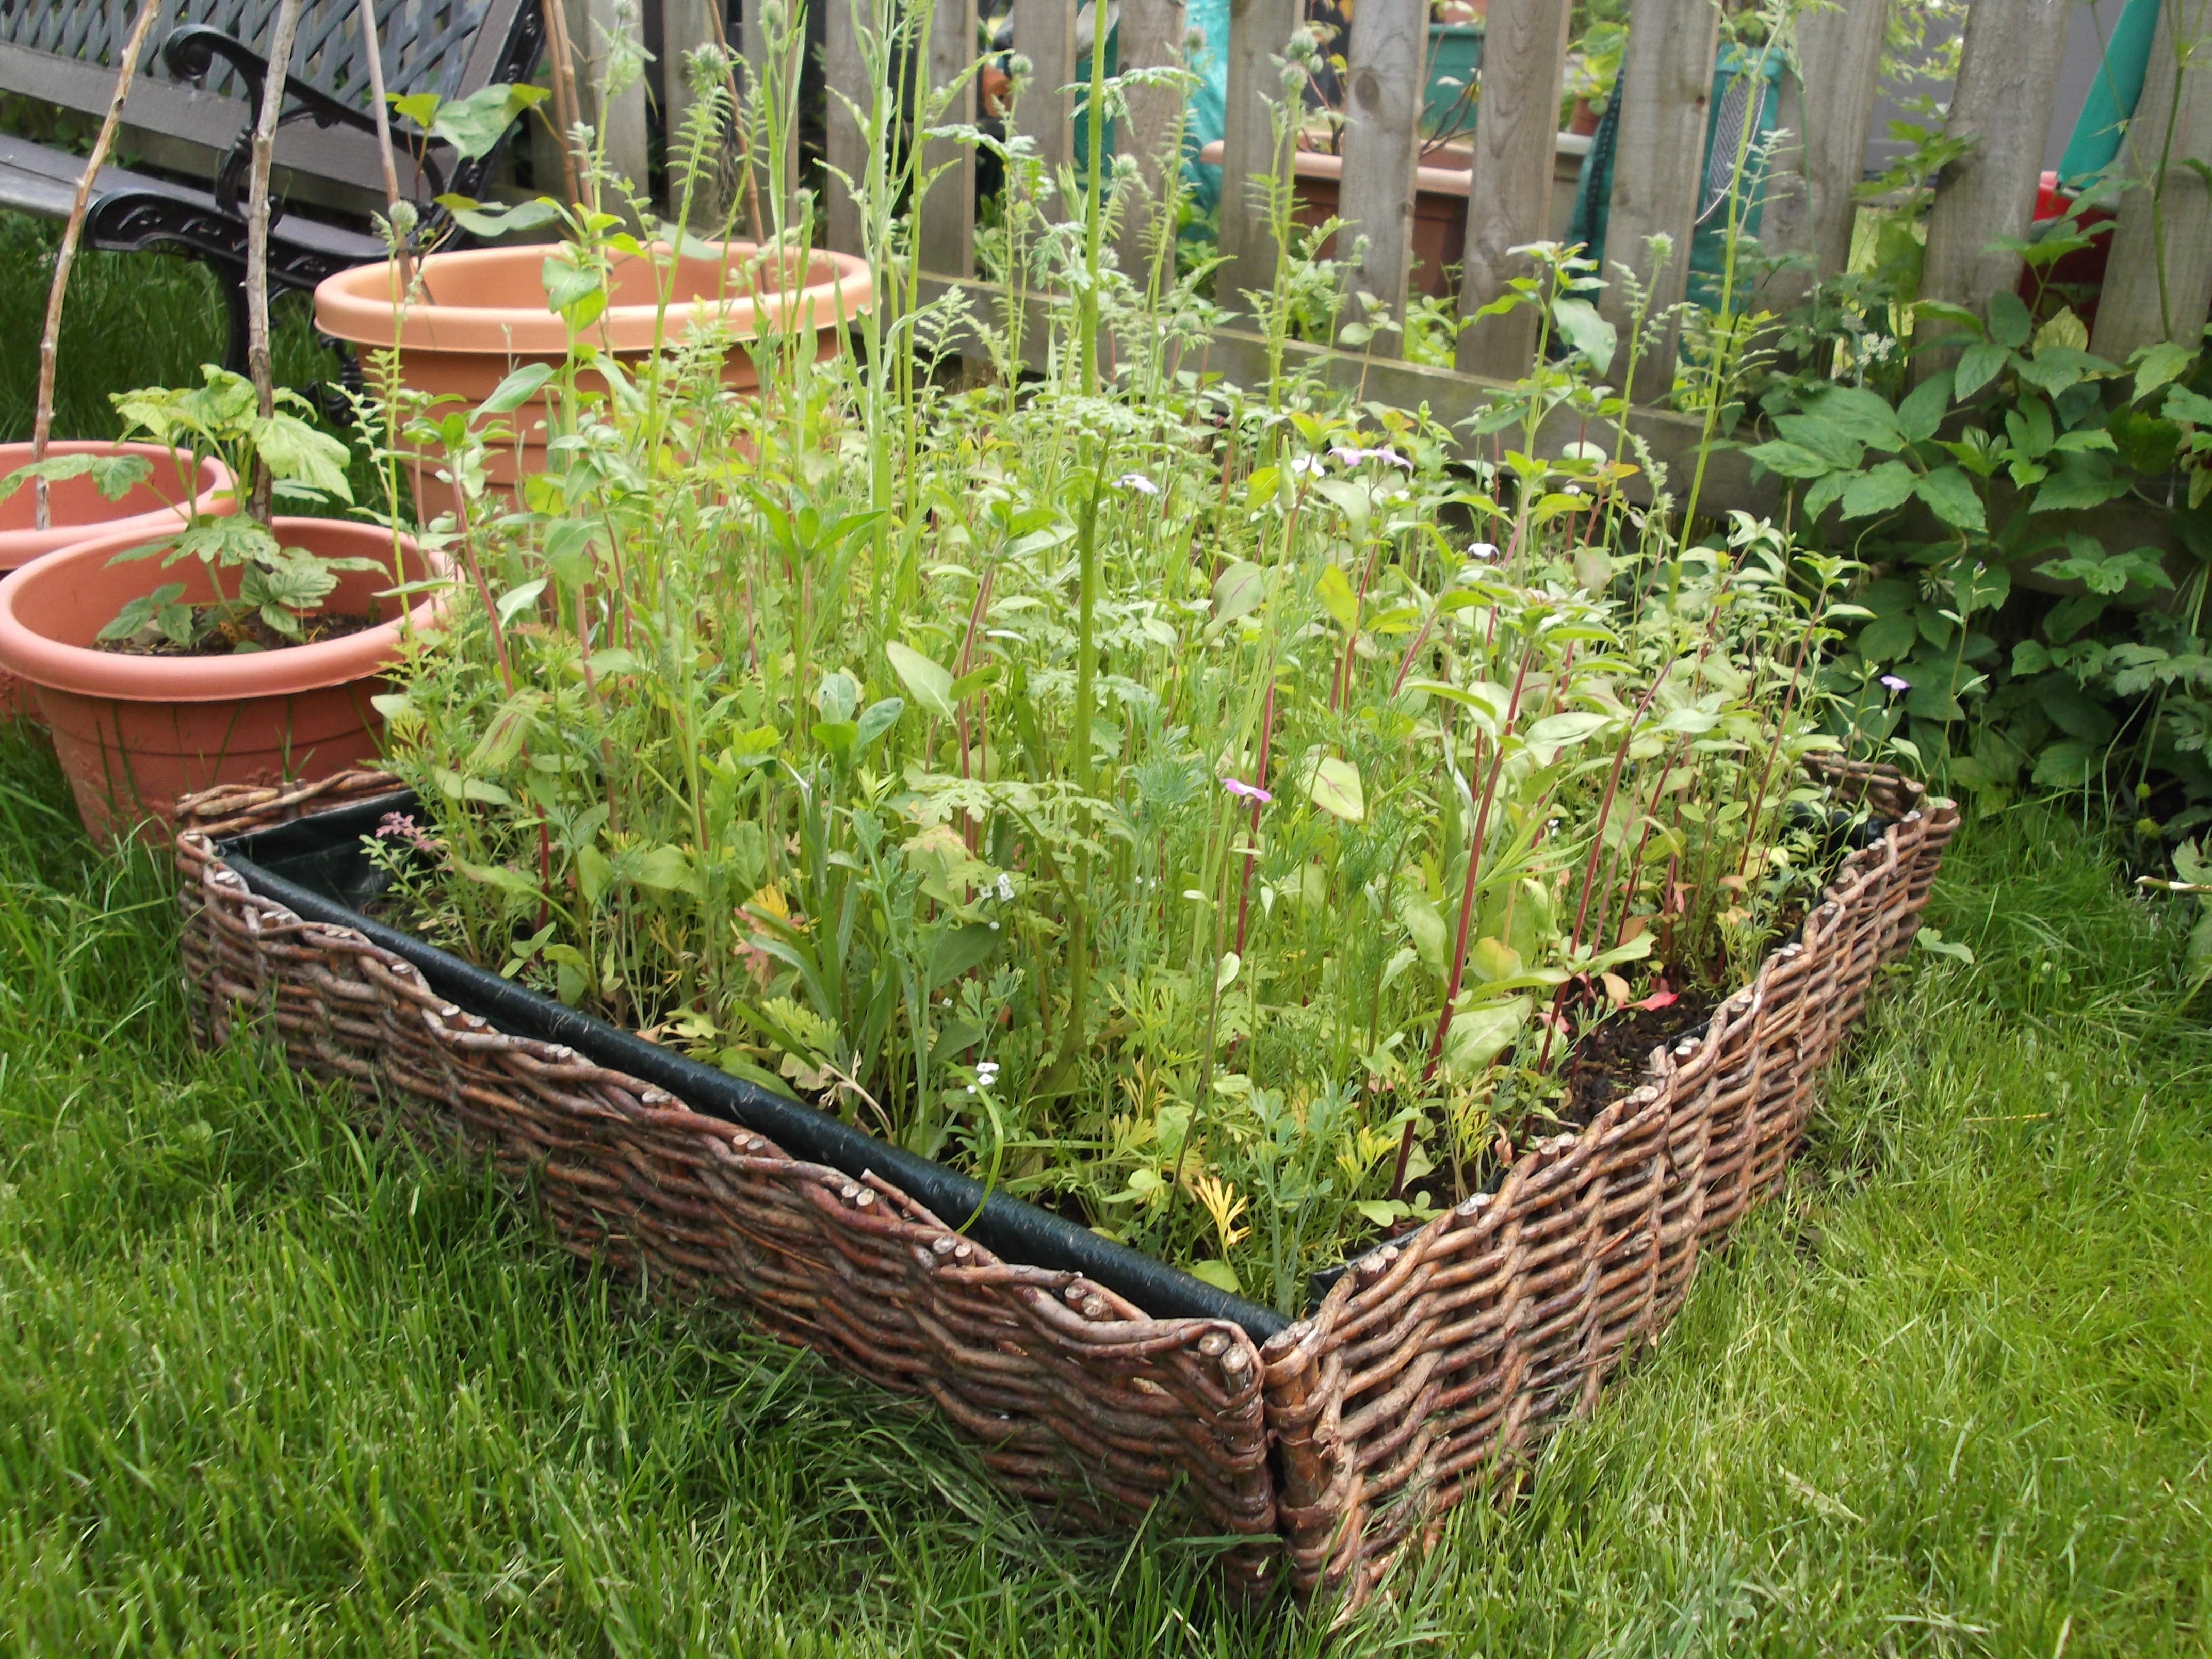 Plants growing in a willow planter